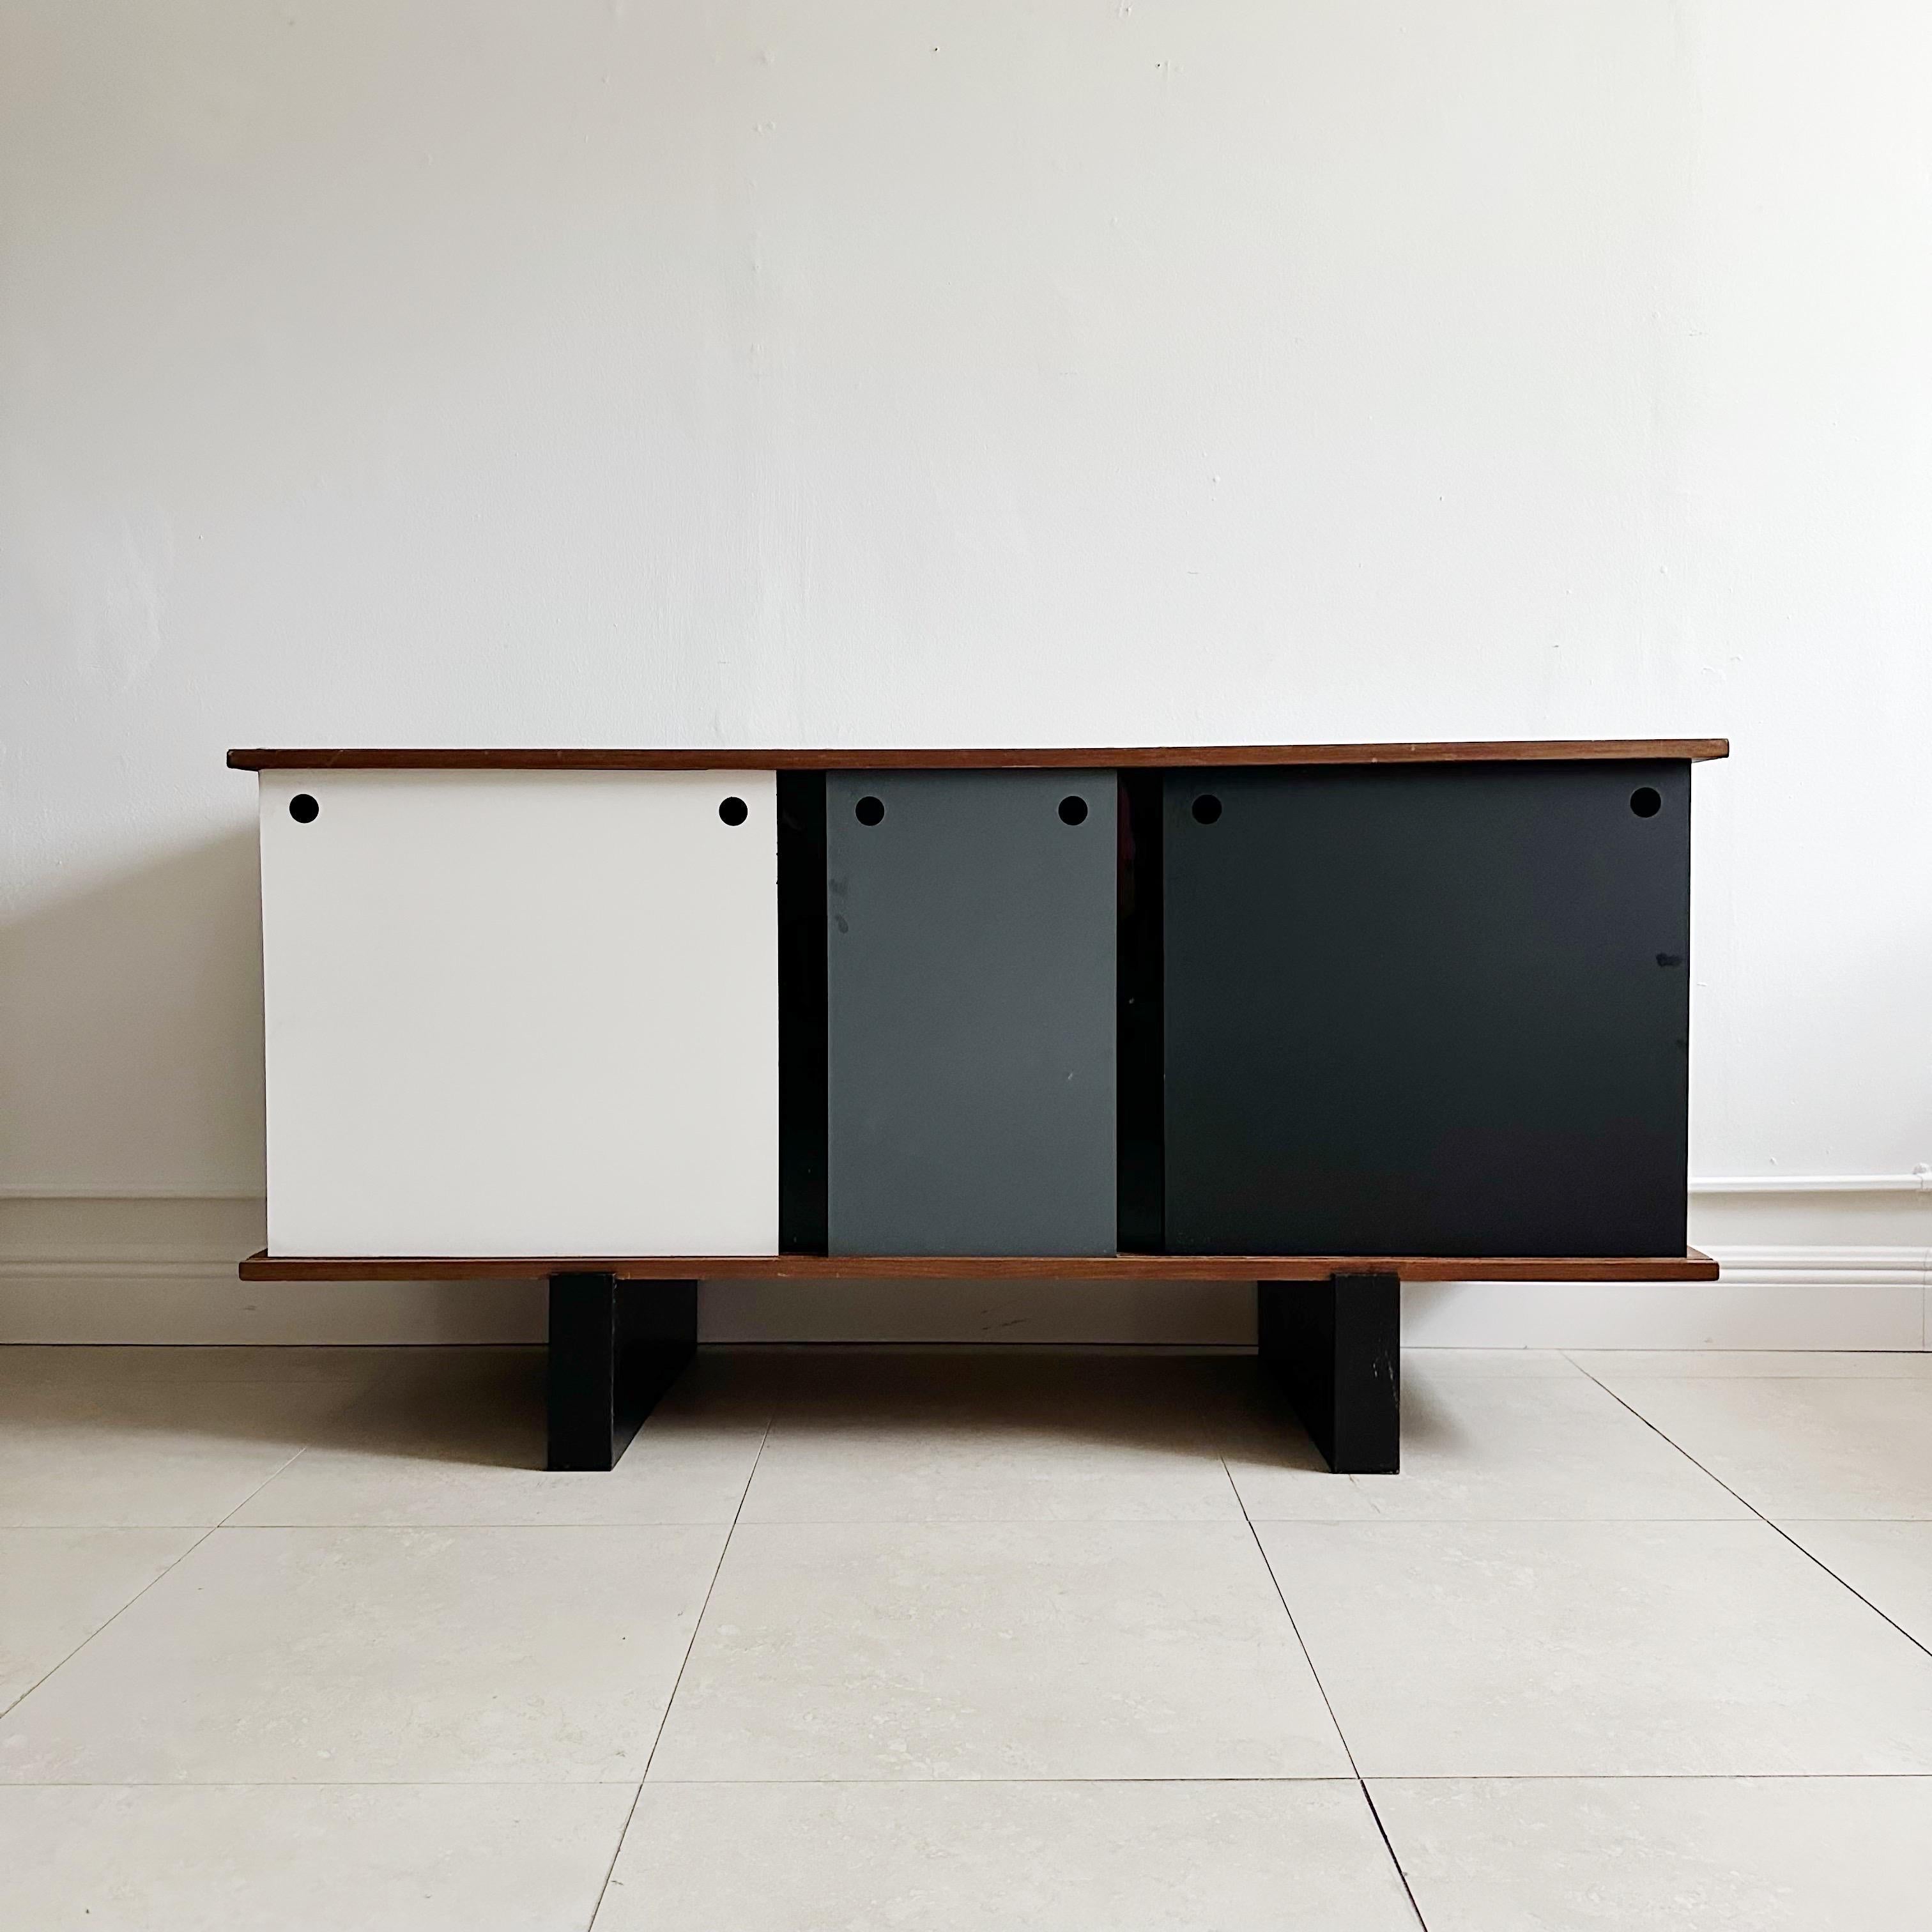 CHARLOTTE PERRIAND (1903-1999)
Buffet from Cité Cansado, Mauritania
circa 1961-62
for Galerie Steph Simon, for Miferma, ash, enameled steel, aluminum, Masonite.  Provenance
Galerie Half, Los Angeles
Collection of Cliff Fong, Los Angeles